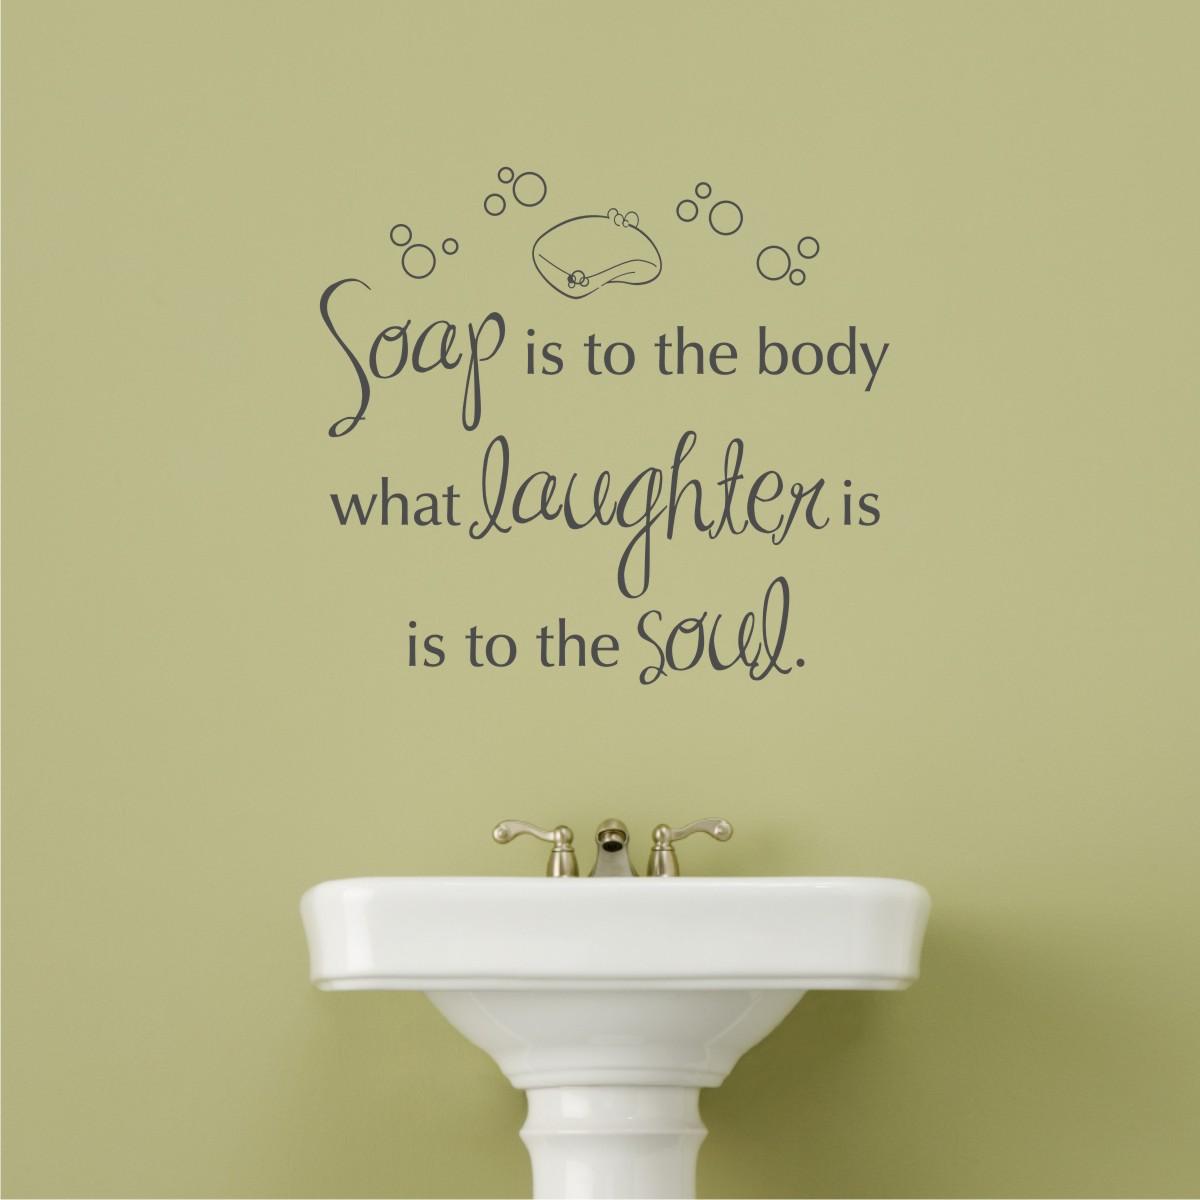 Soap is Laughter Wall Quotes™ Decal | WallQuotes.com